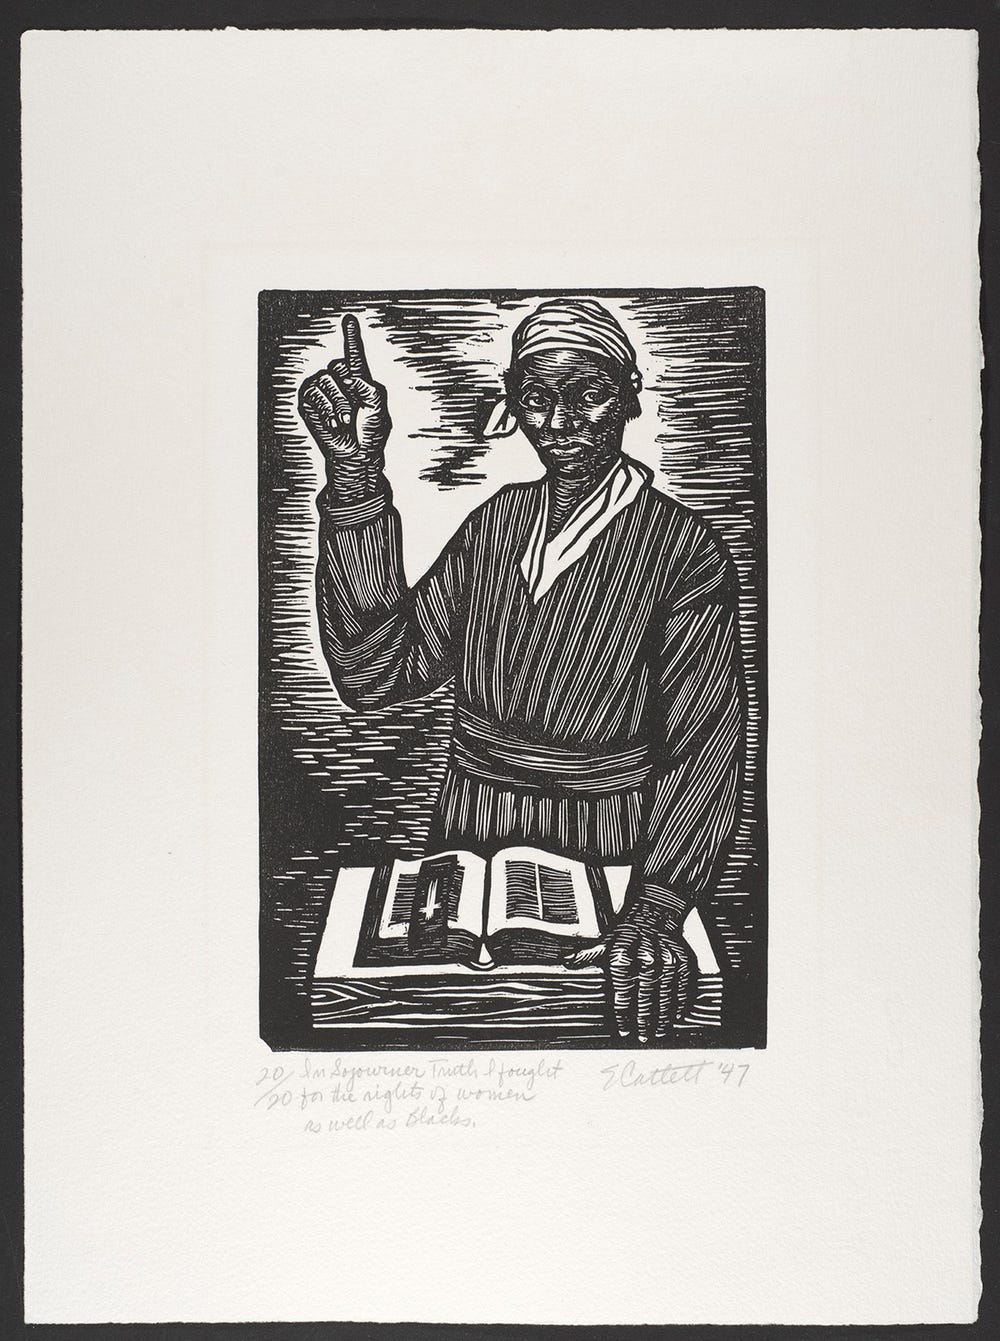 Black woman standing over a book with her finger raised